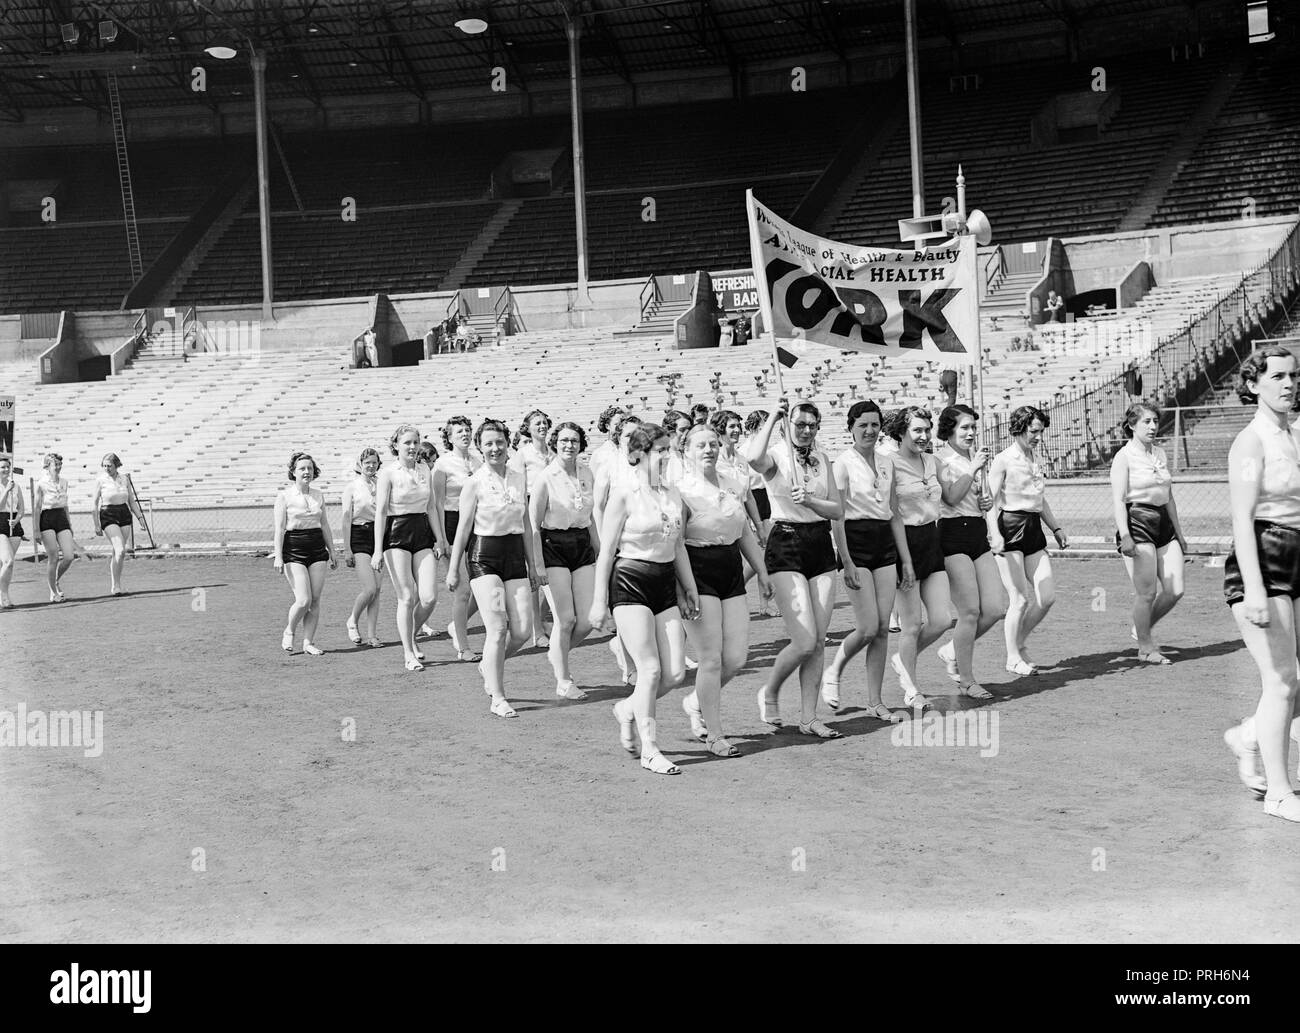 Members of The Women's League of Health and Beauty, marching inside a large sports stadium in England during the 1930s. Banners from the branch at York is visible. They are campaigning about Racial Health Stock Photo